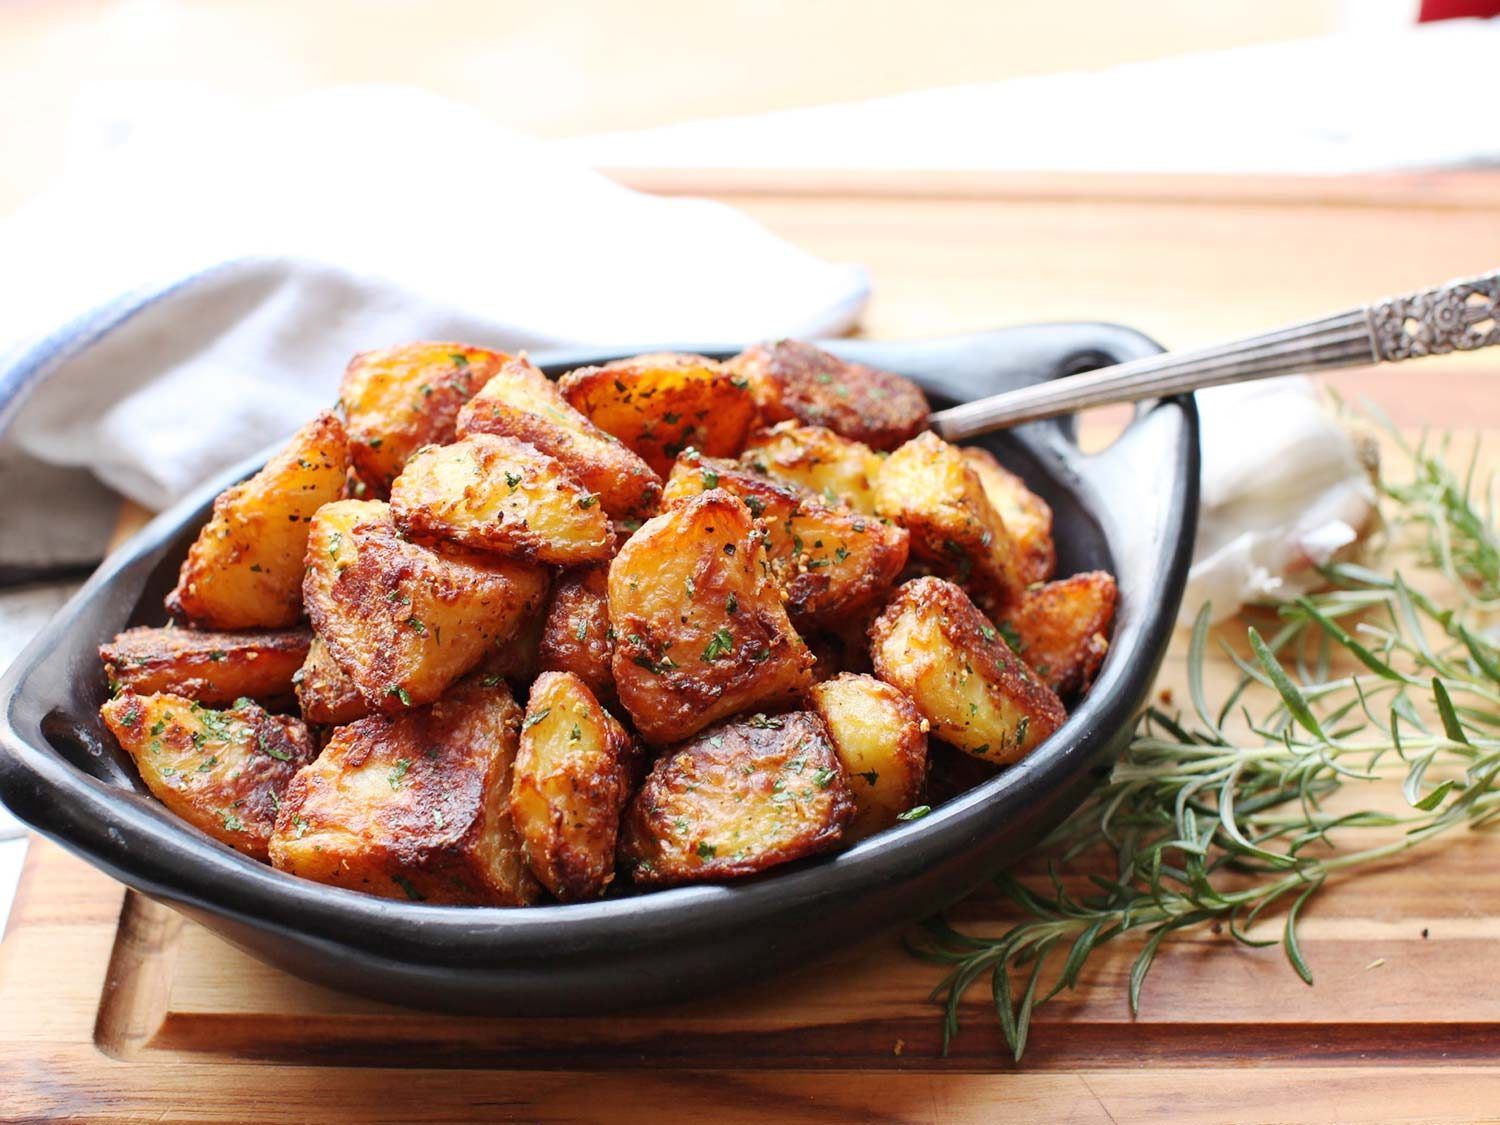 🍟 Believe It or Not, We Can Guess Your Age Just by How You Rate These Potato Dishes Crispy roasted potatoes